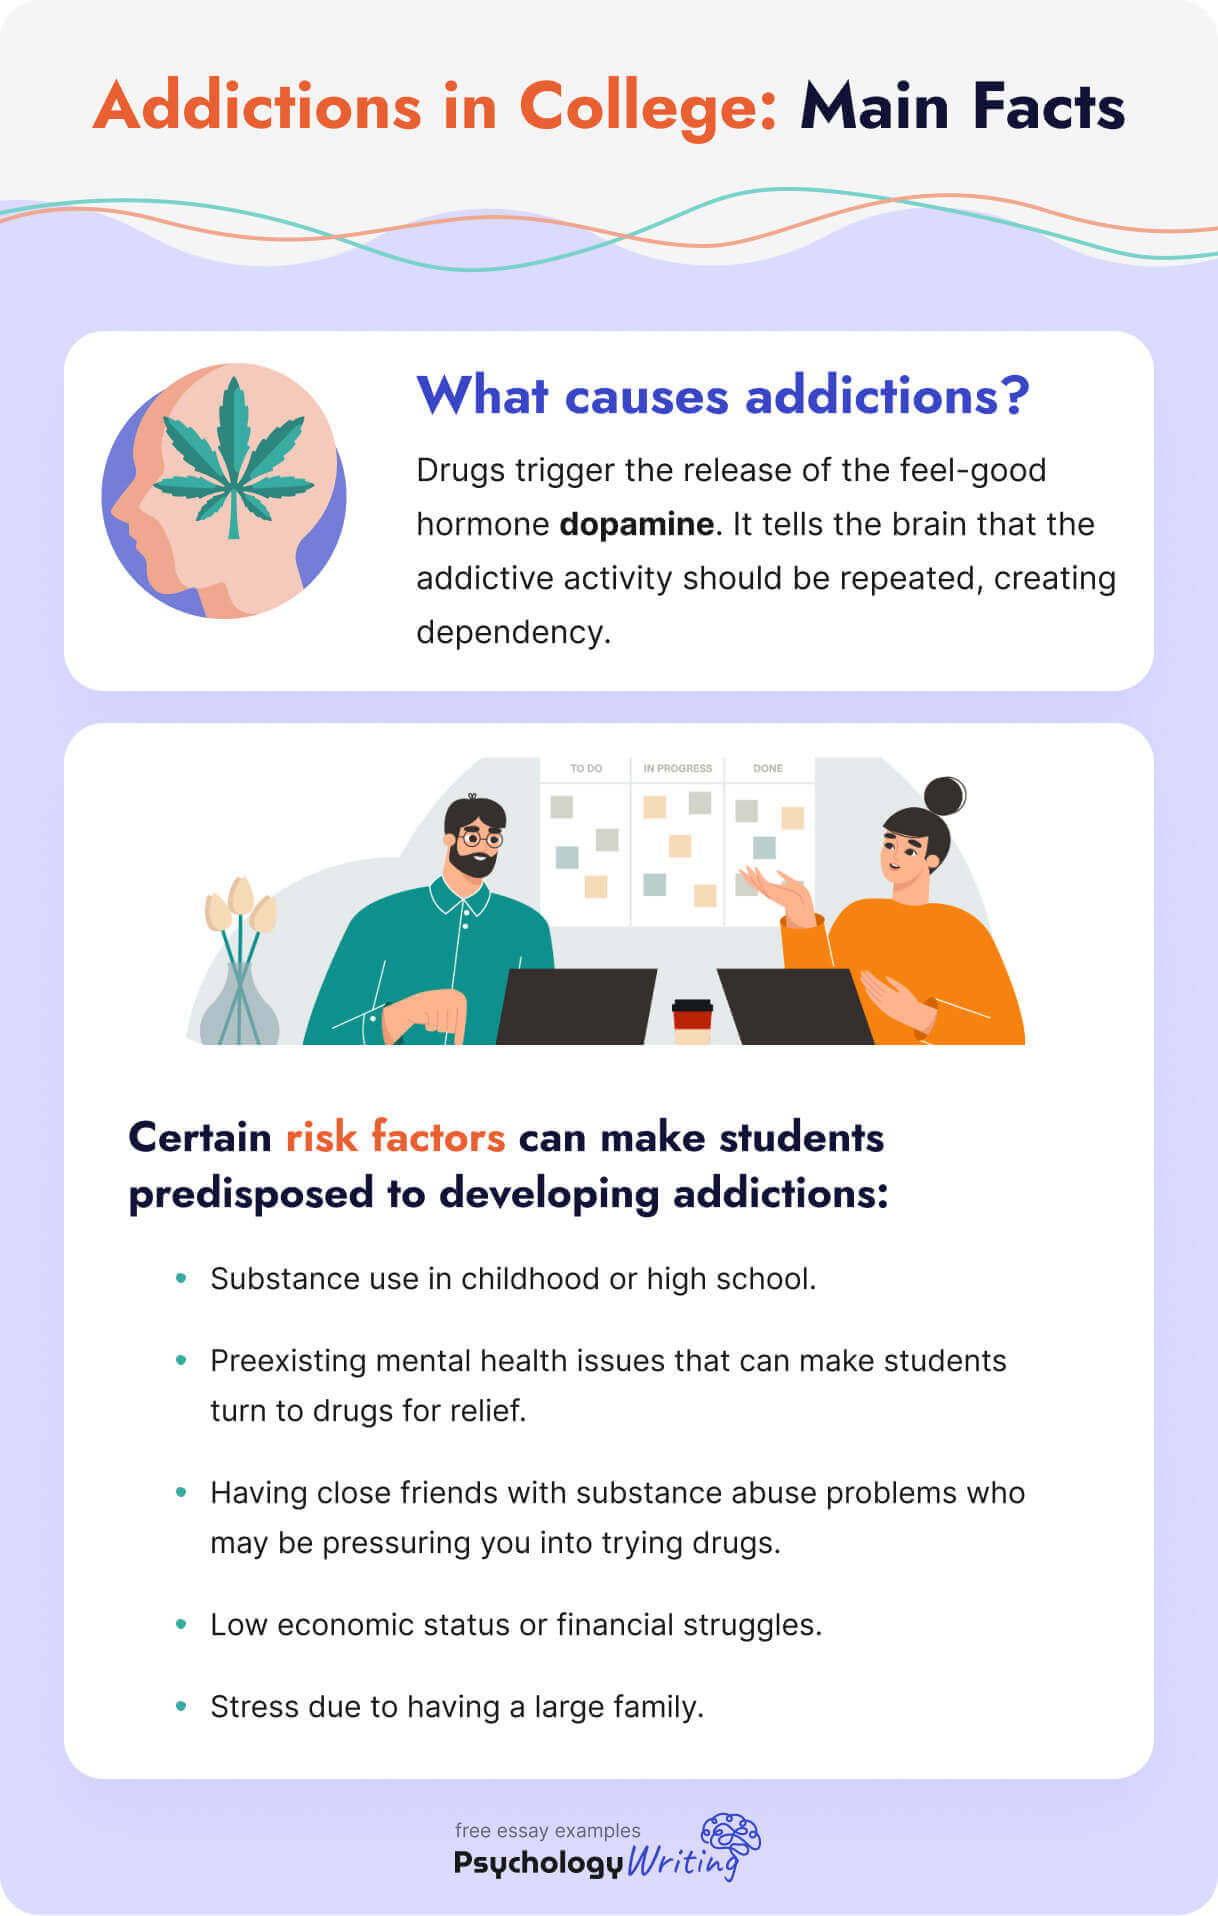 The picture enumerates main facts about addictions in college. 